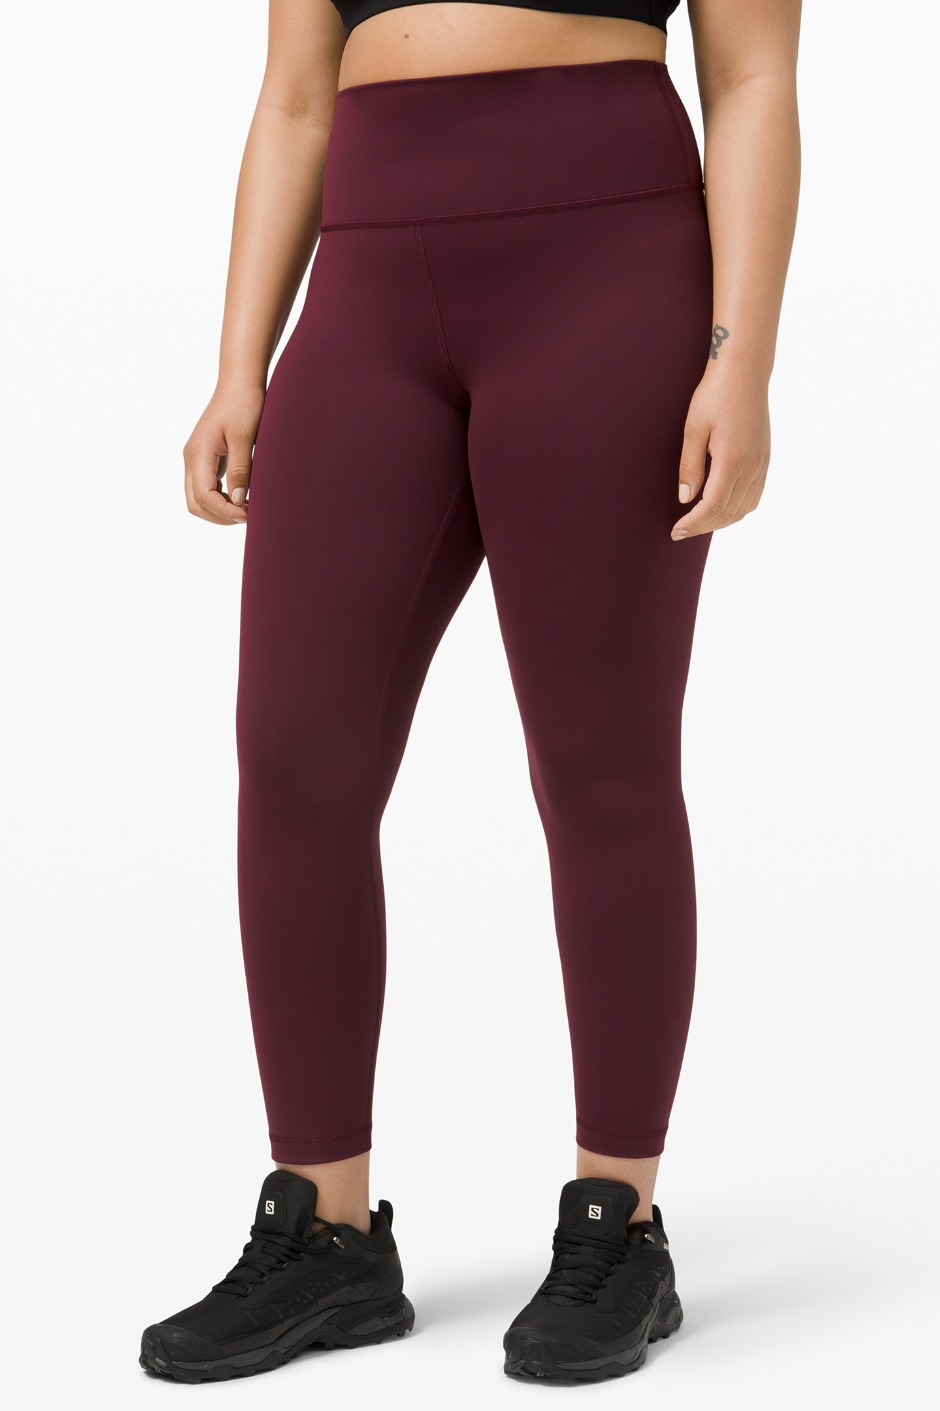 Gym goers are ditching their pricey leggings for this  pair